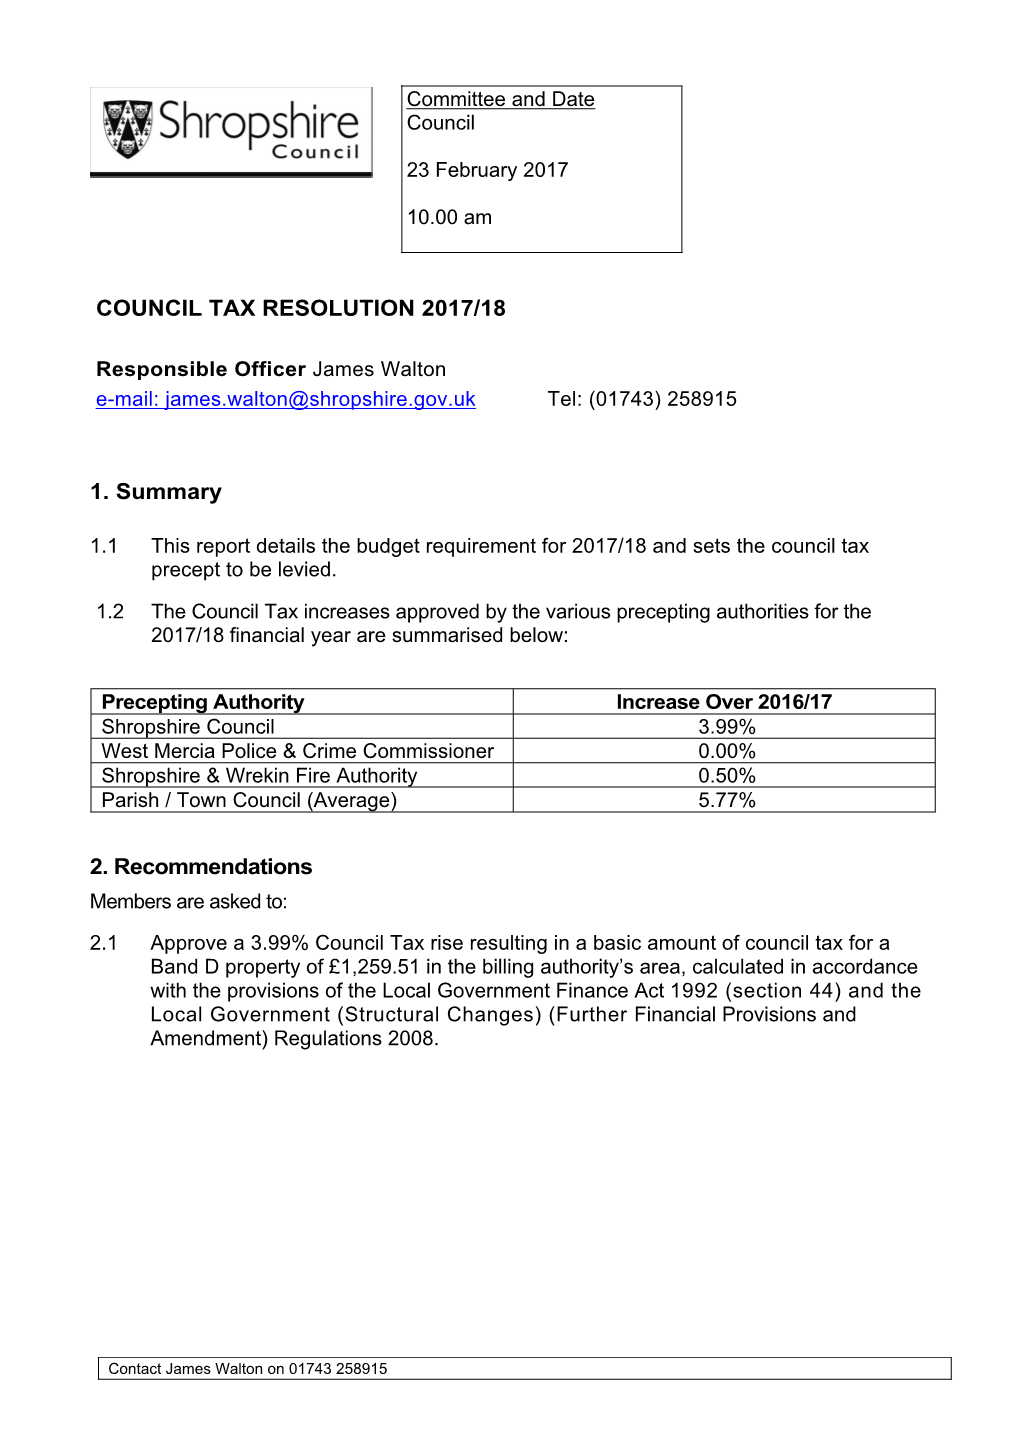 Council Tax Resolution 2017/18 1